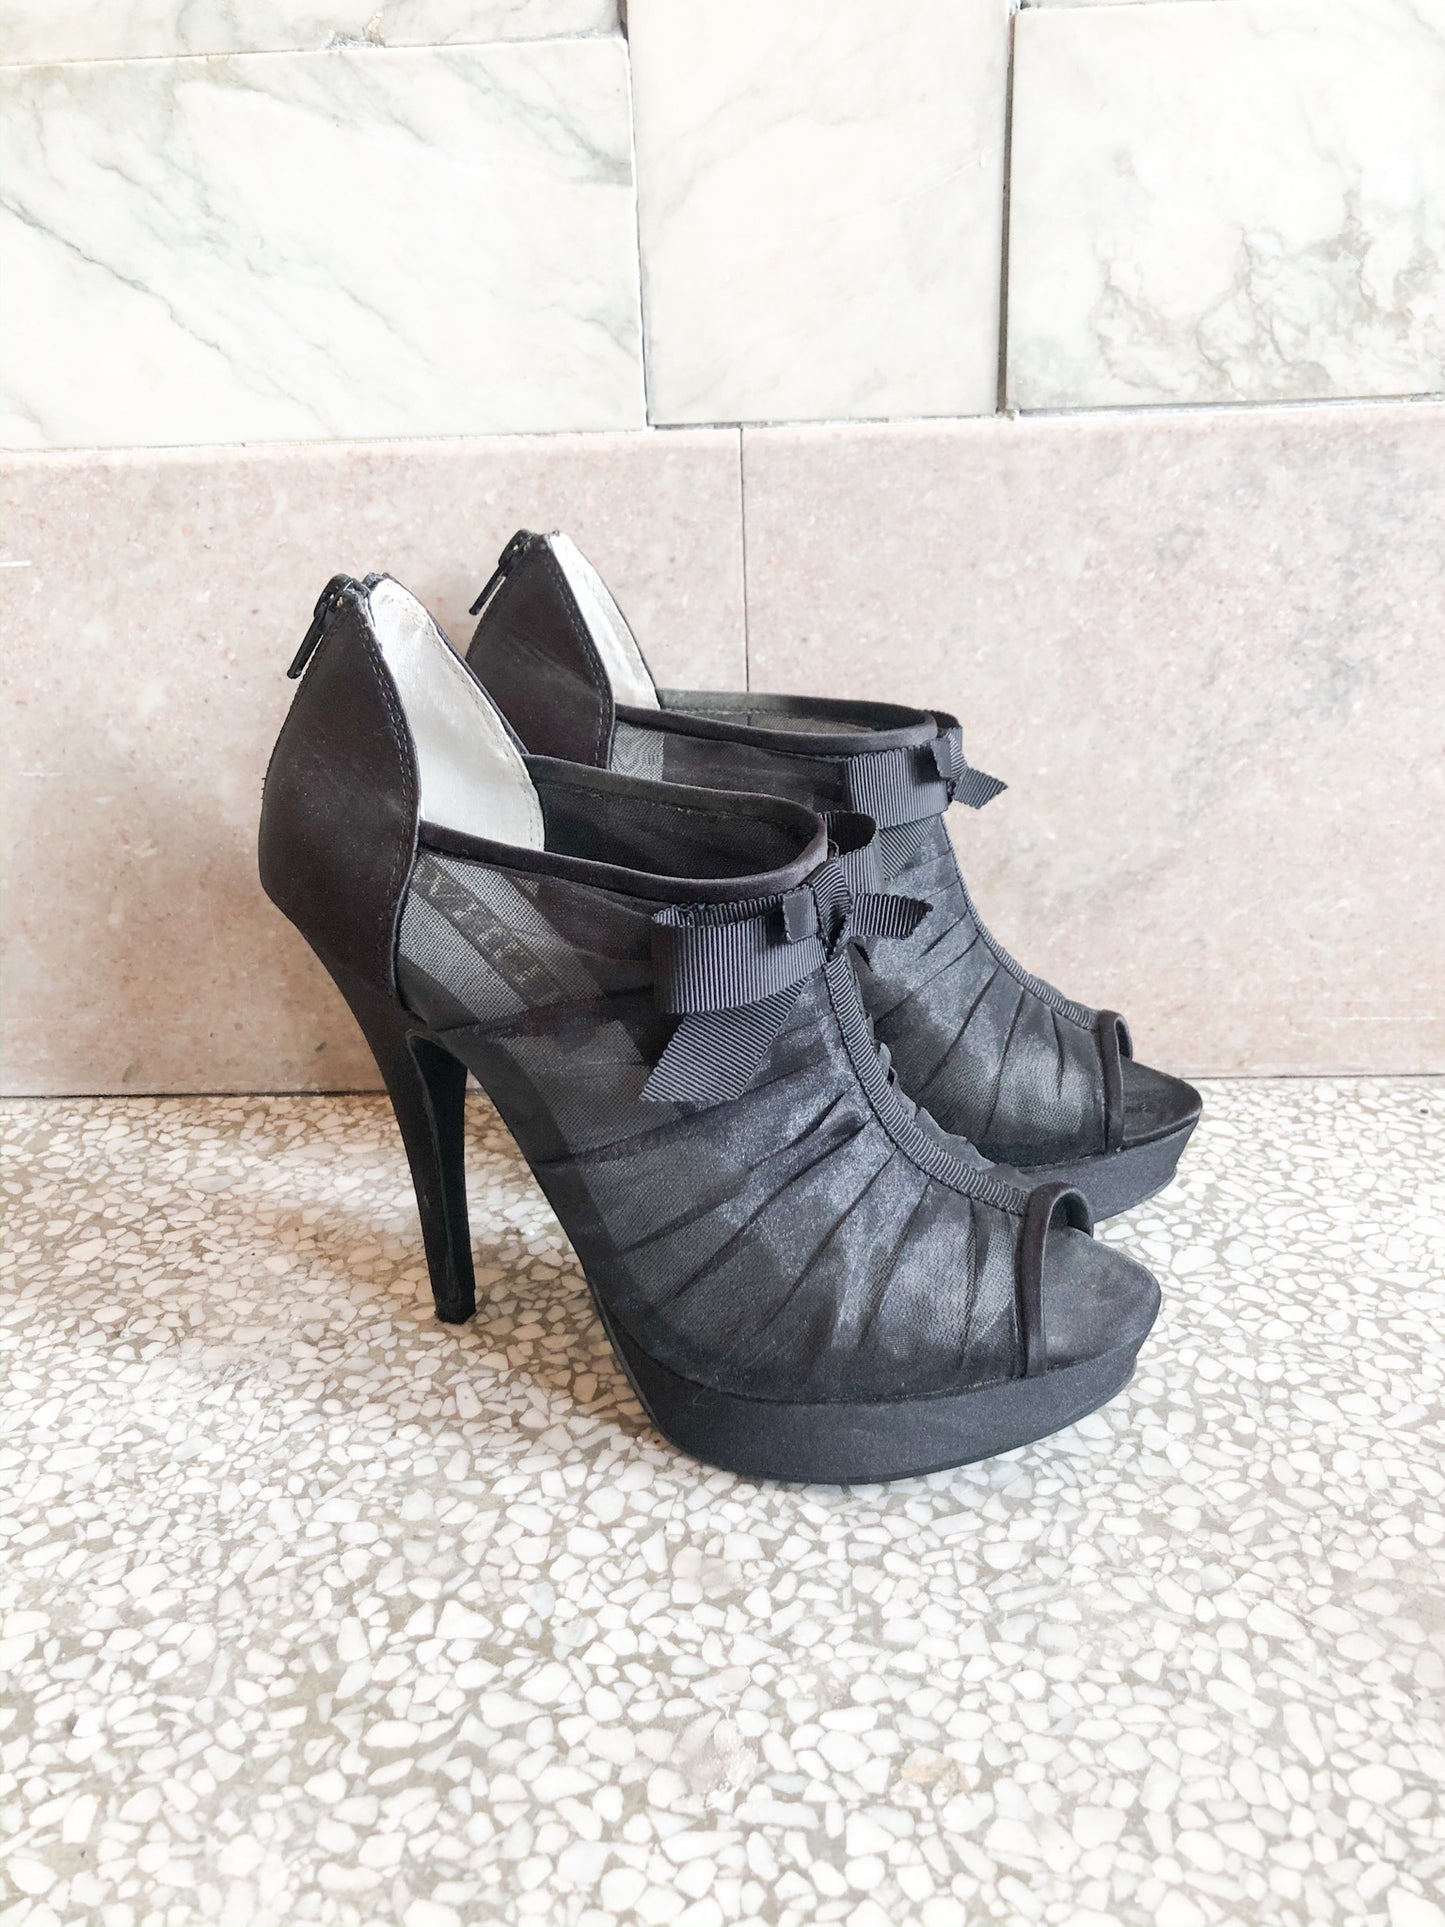 White by Vera Wang Black Sheer Bow Cage Heels - Le Prix Fashion & Consulting